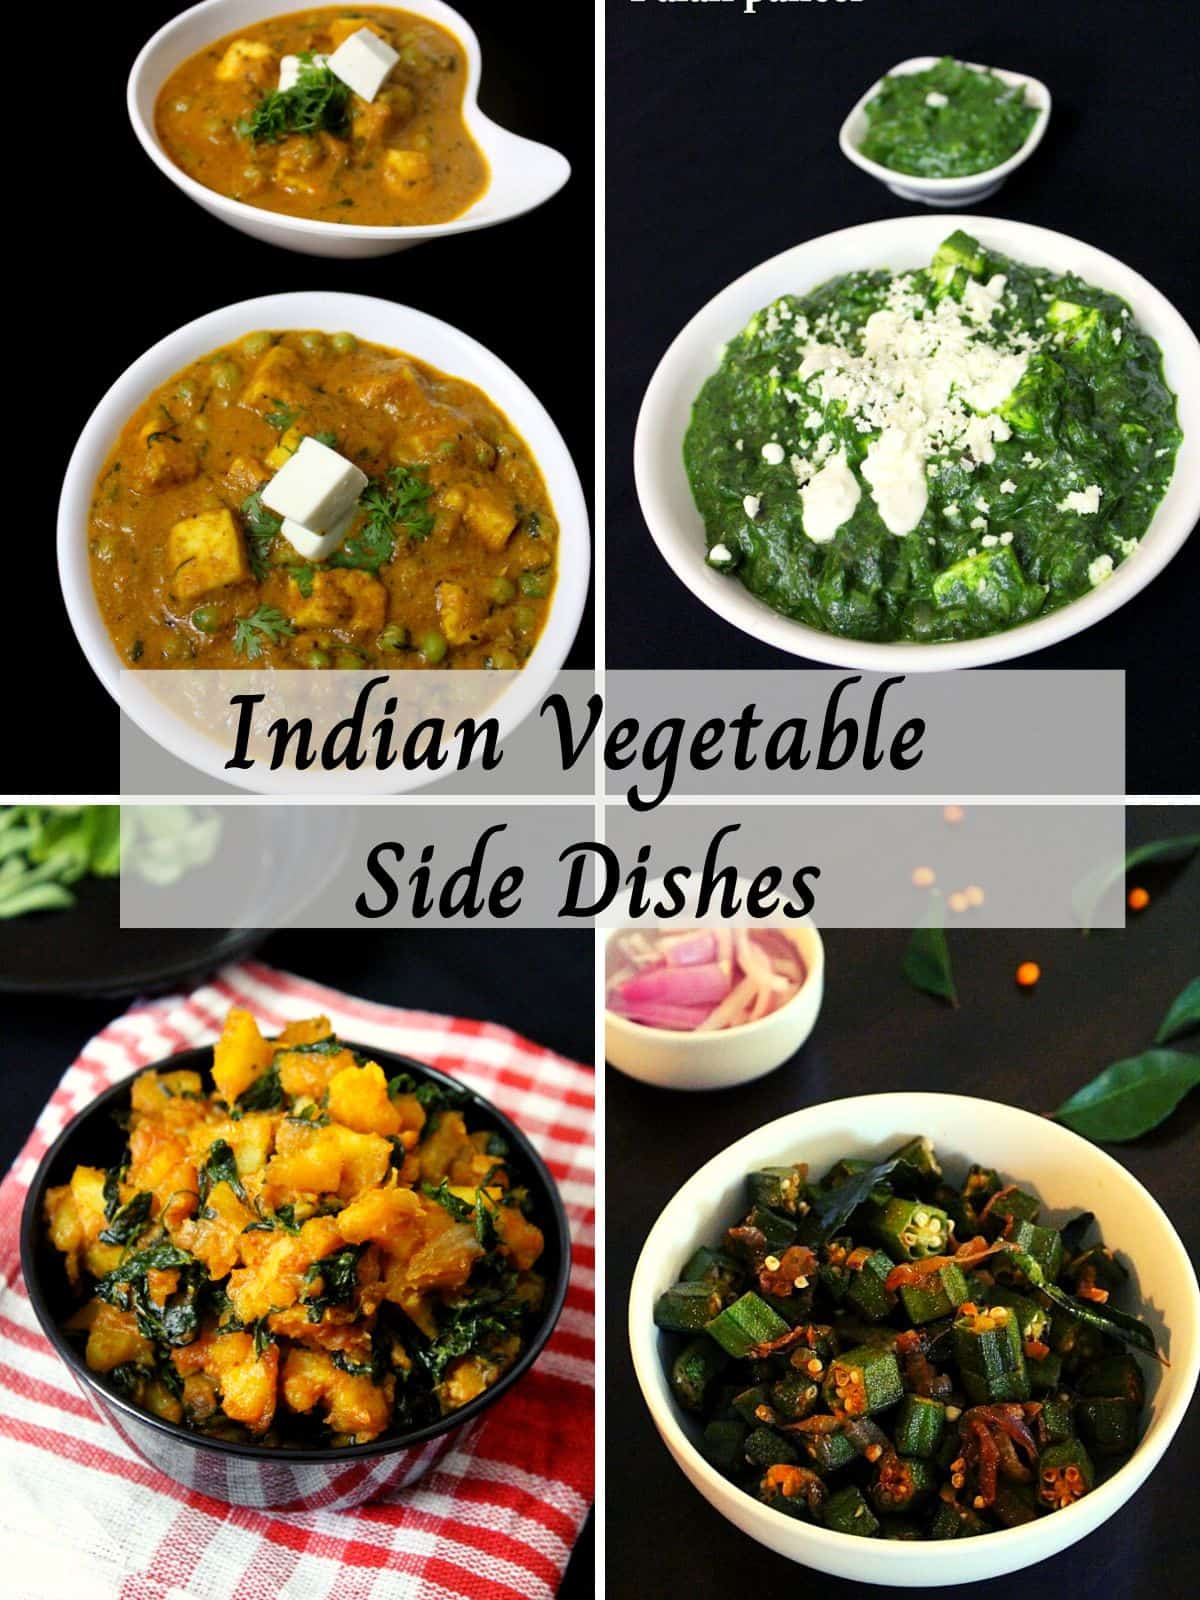 recipes made with vegetables as Indian side dishes